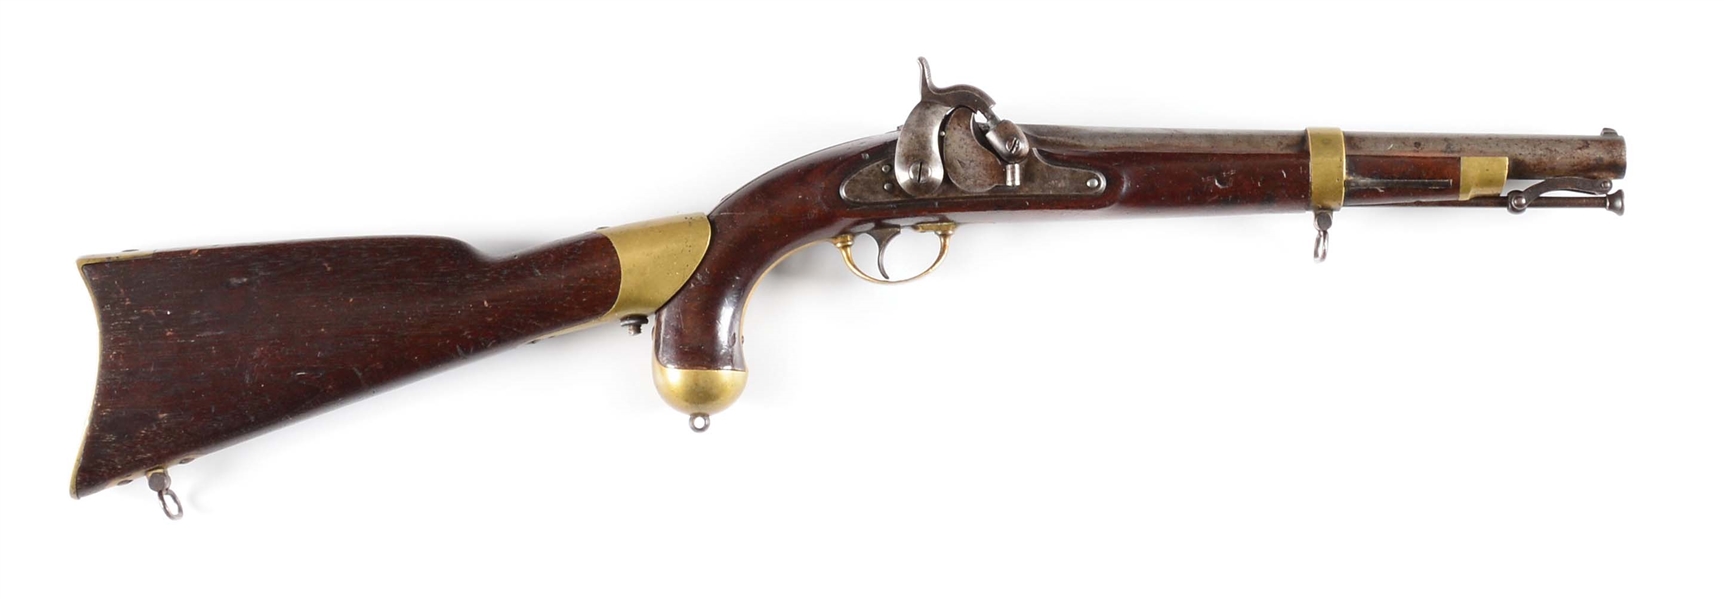 (A) SPRINGFIELD MODEL 1855 PERCUSSION PISTOL CARBINE WITH STOCK.